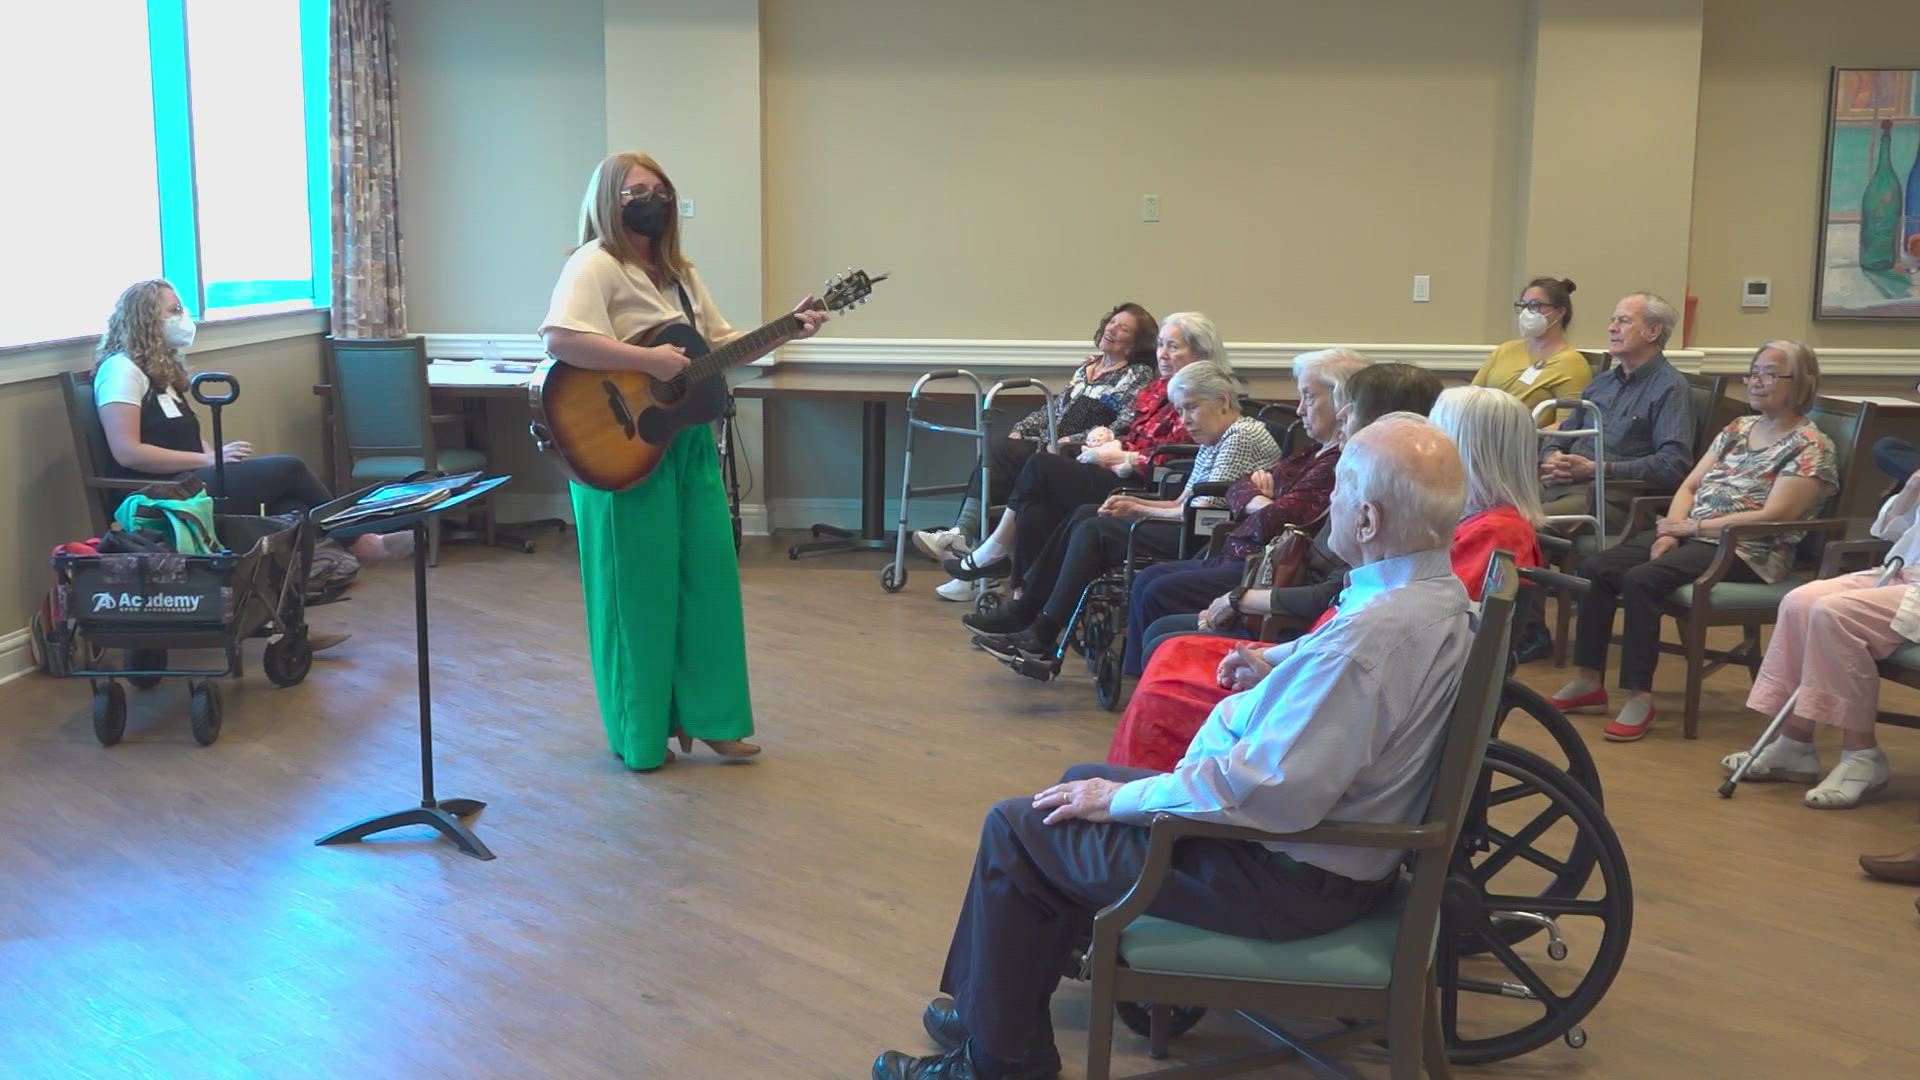 Madison Michel noticed the power of music when she sang to her grandma, who suffered from dementia.